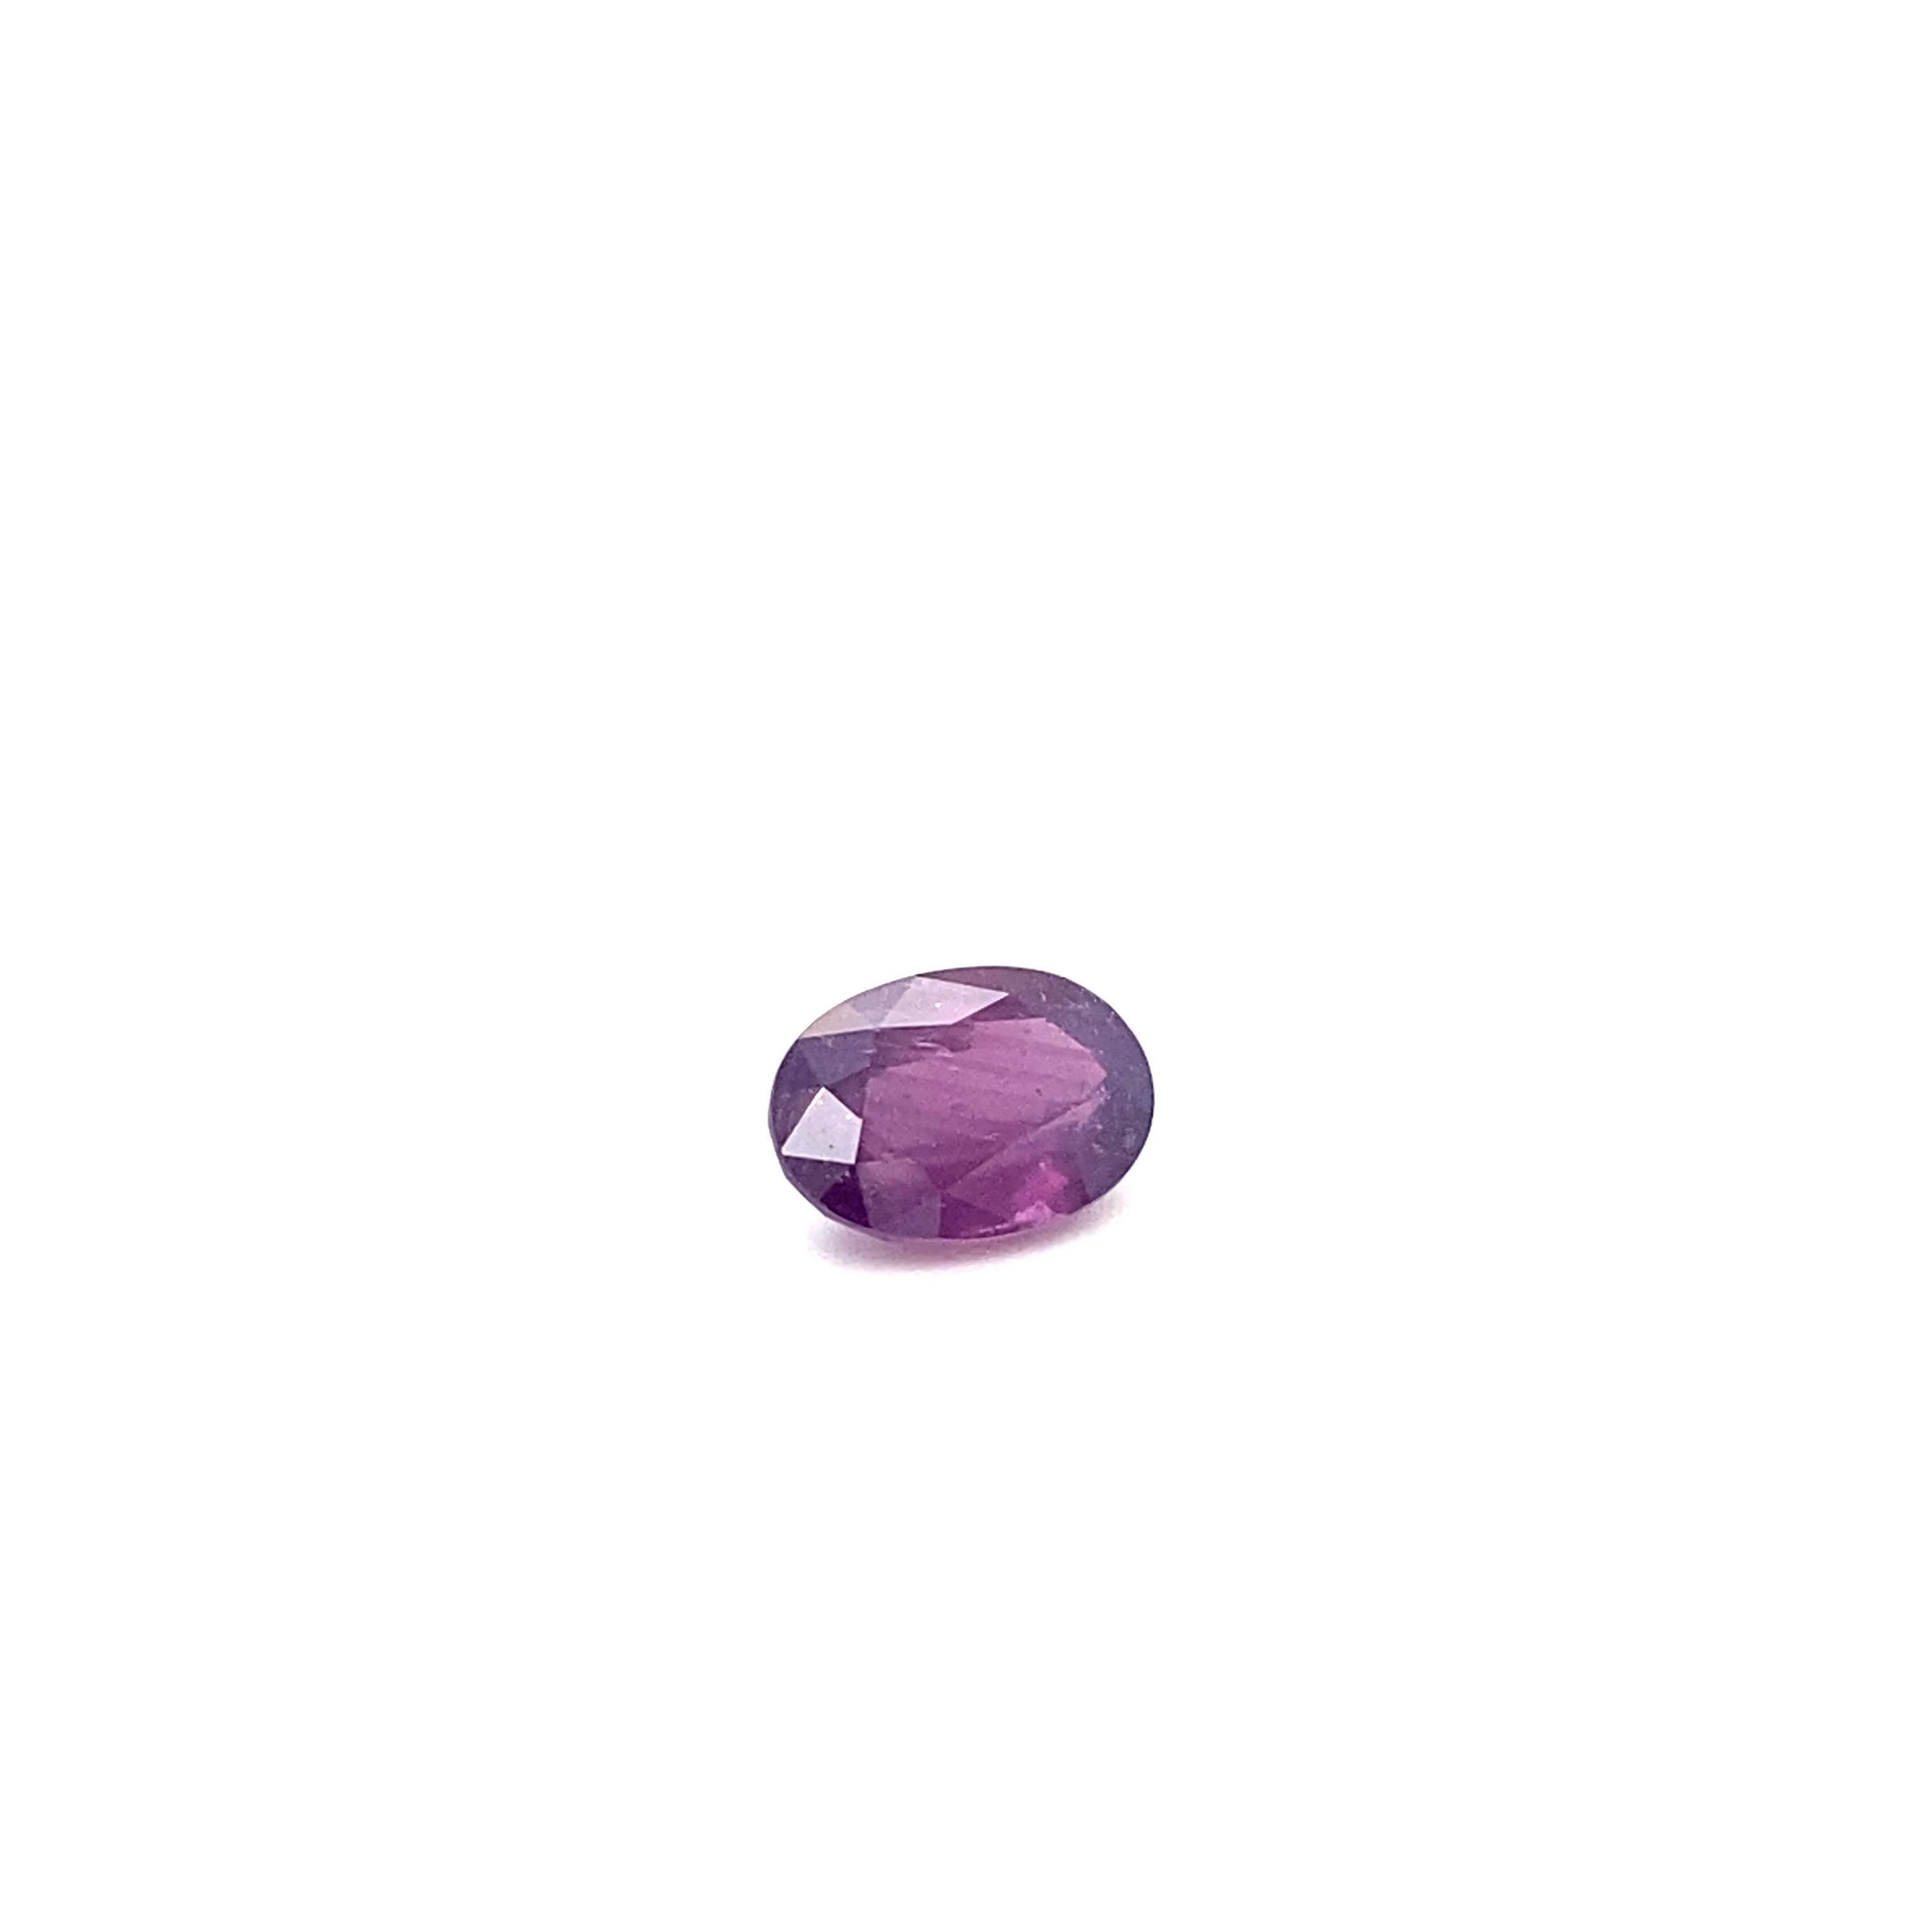 Artisan GIA Certified 5.94 Carat Oval Shape Natural Pink Purple Sapphire Loose Gemstone For Sale